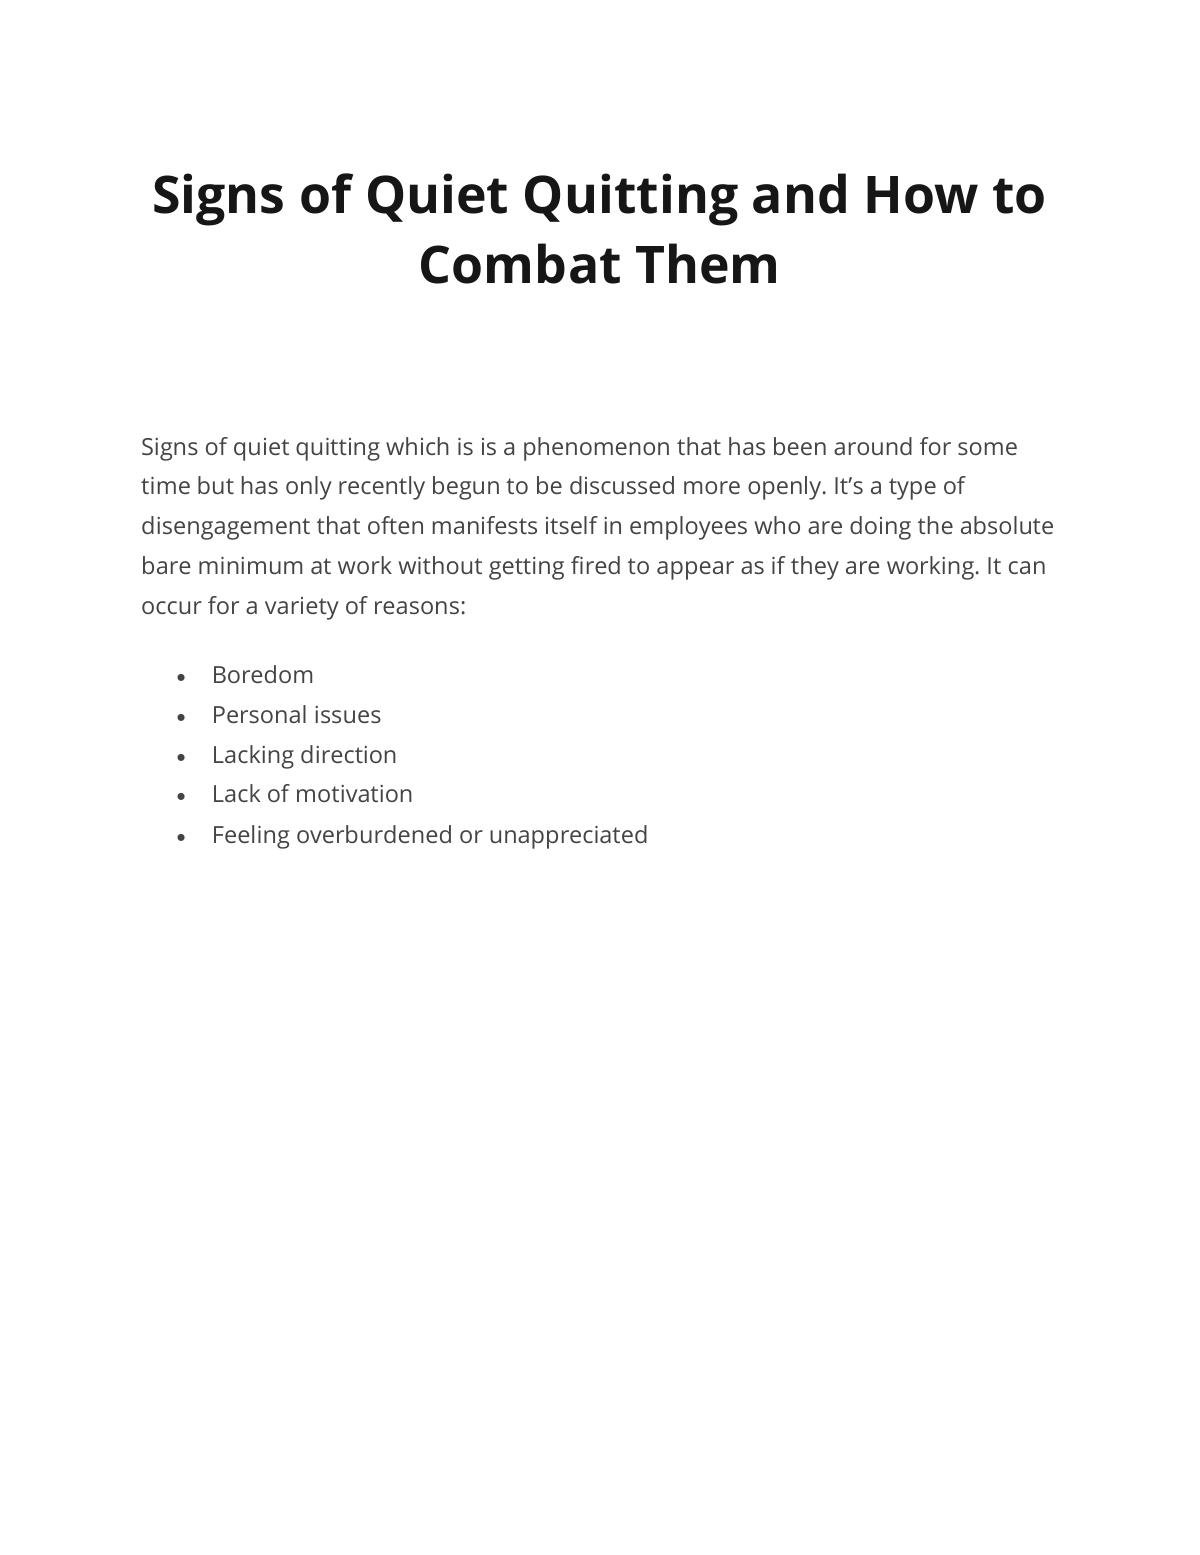 Signs of Quiet Quitting and How to Combat Them